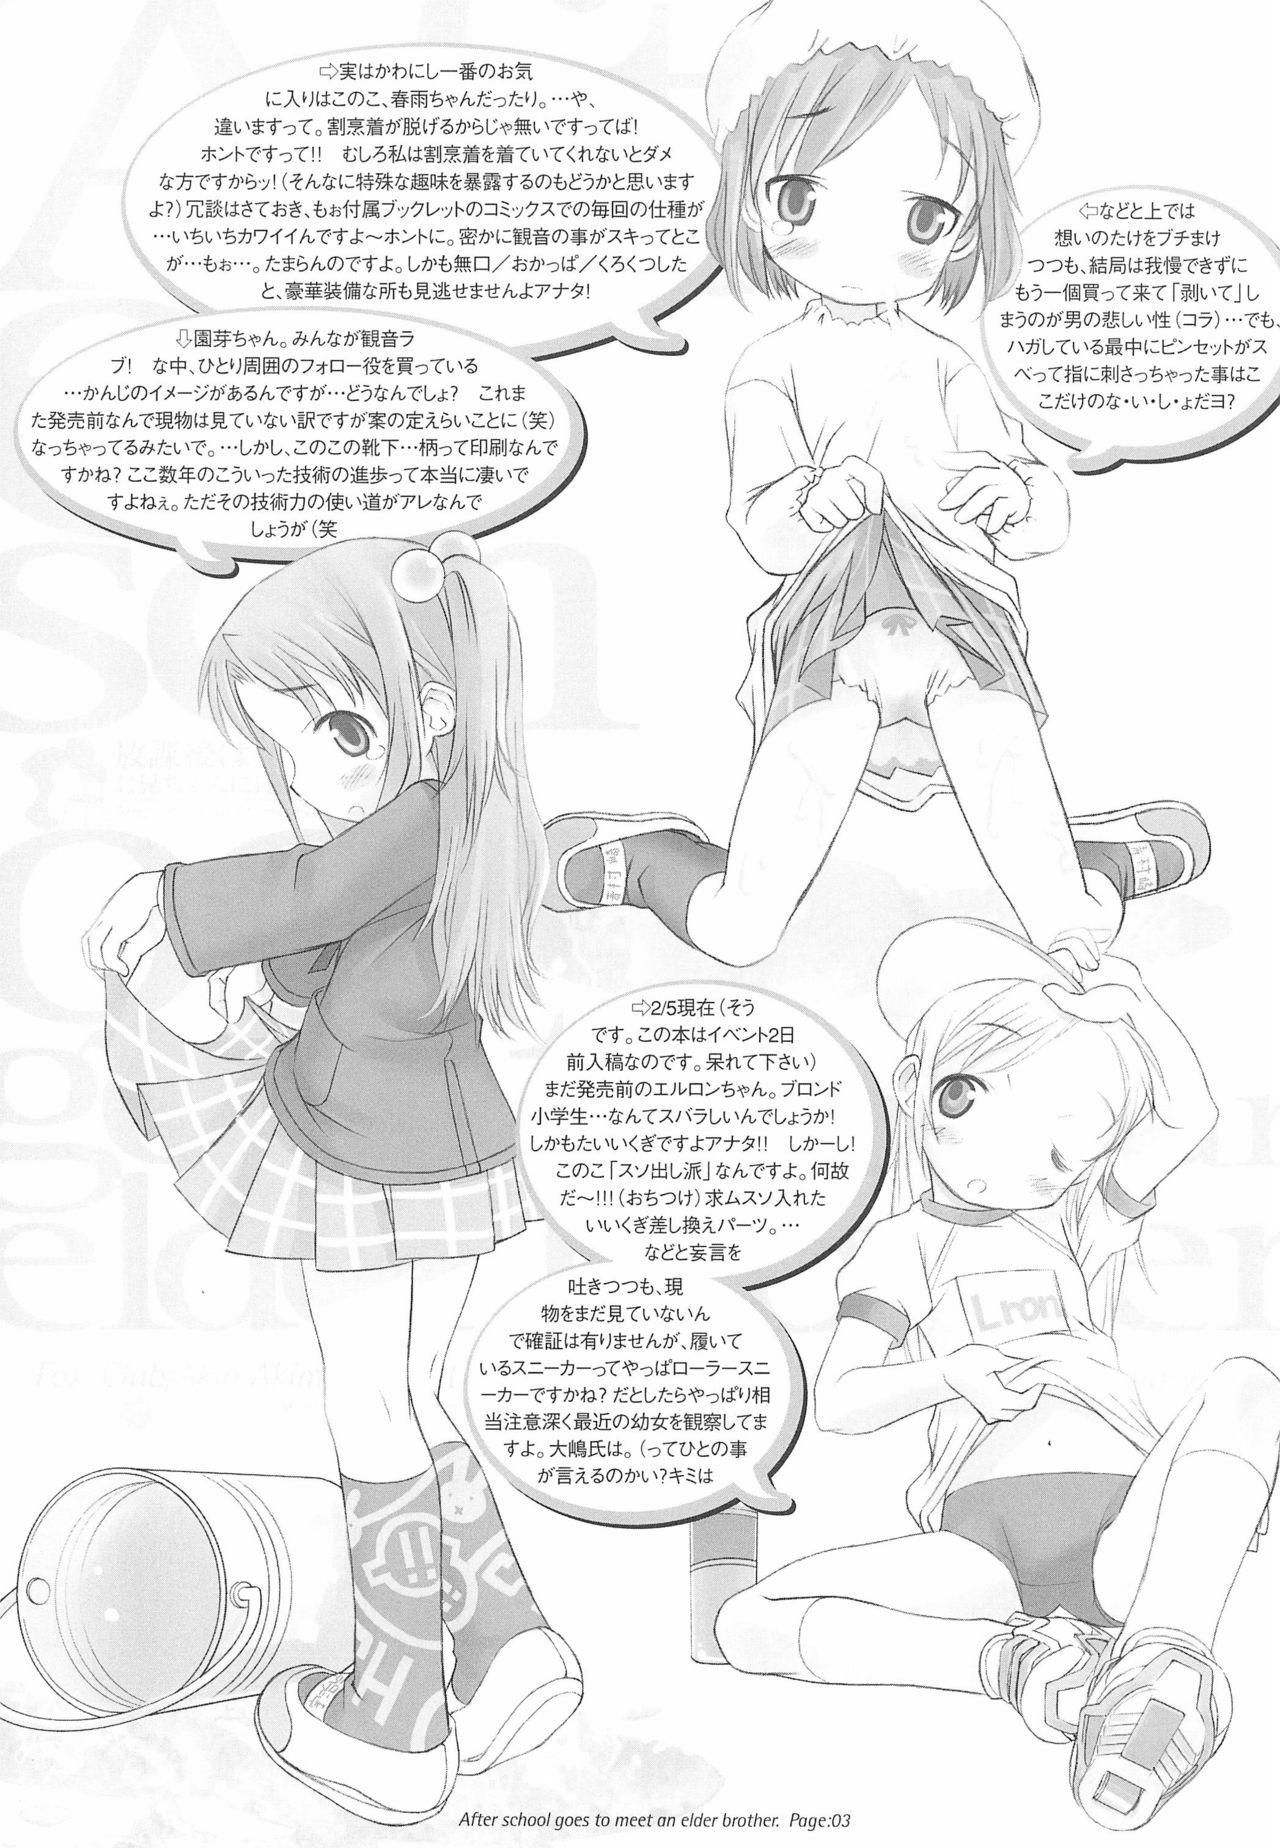 Tinytits After School Goes To Meet An Elder Brother - Shuukan watashi no onii-chan | weekly dearest my brother Compilation - Page 3